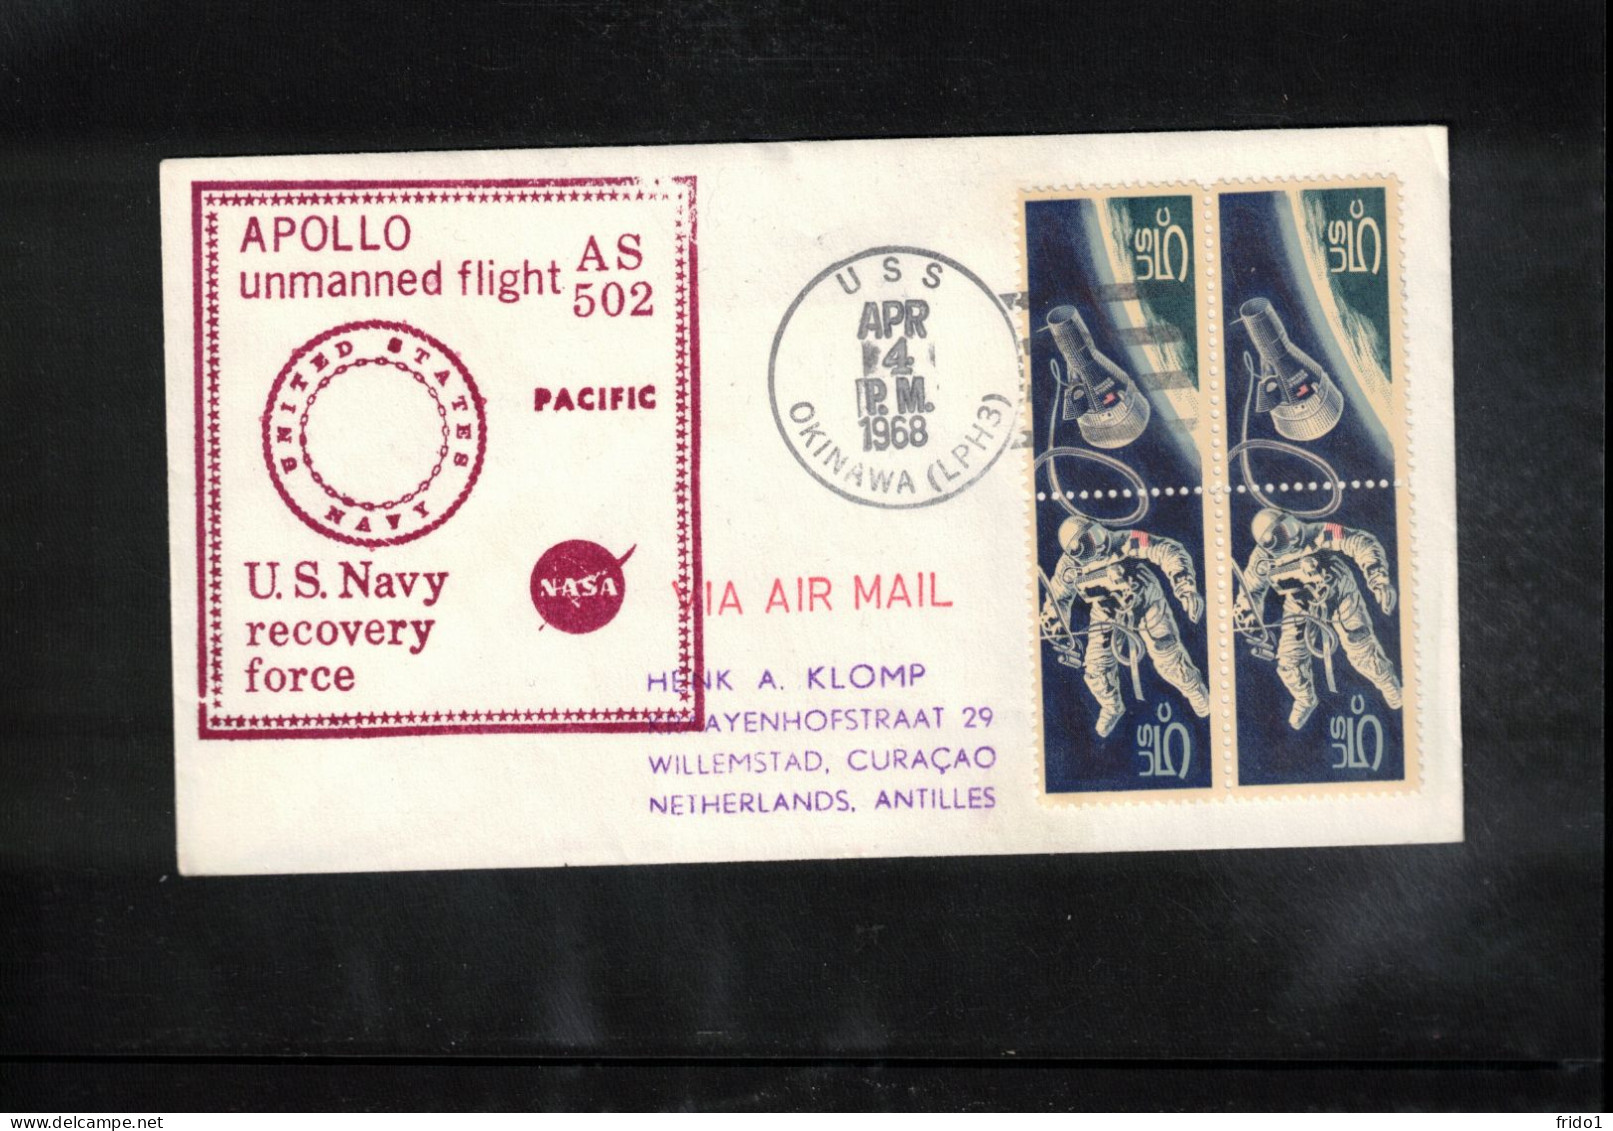 USA 1968 Space / Weltraum Apollo Unmanned Flight AS 502 - US Navy Recovery Force Ship USS Okinawa Interesting Cover - Estados Unidos